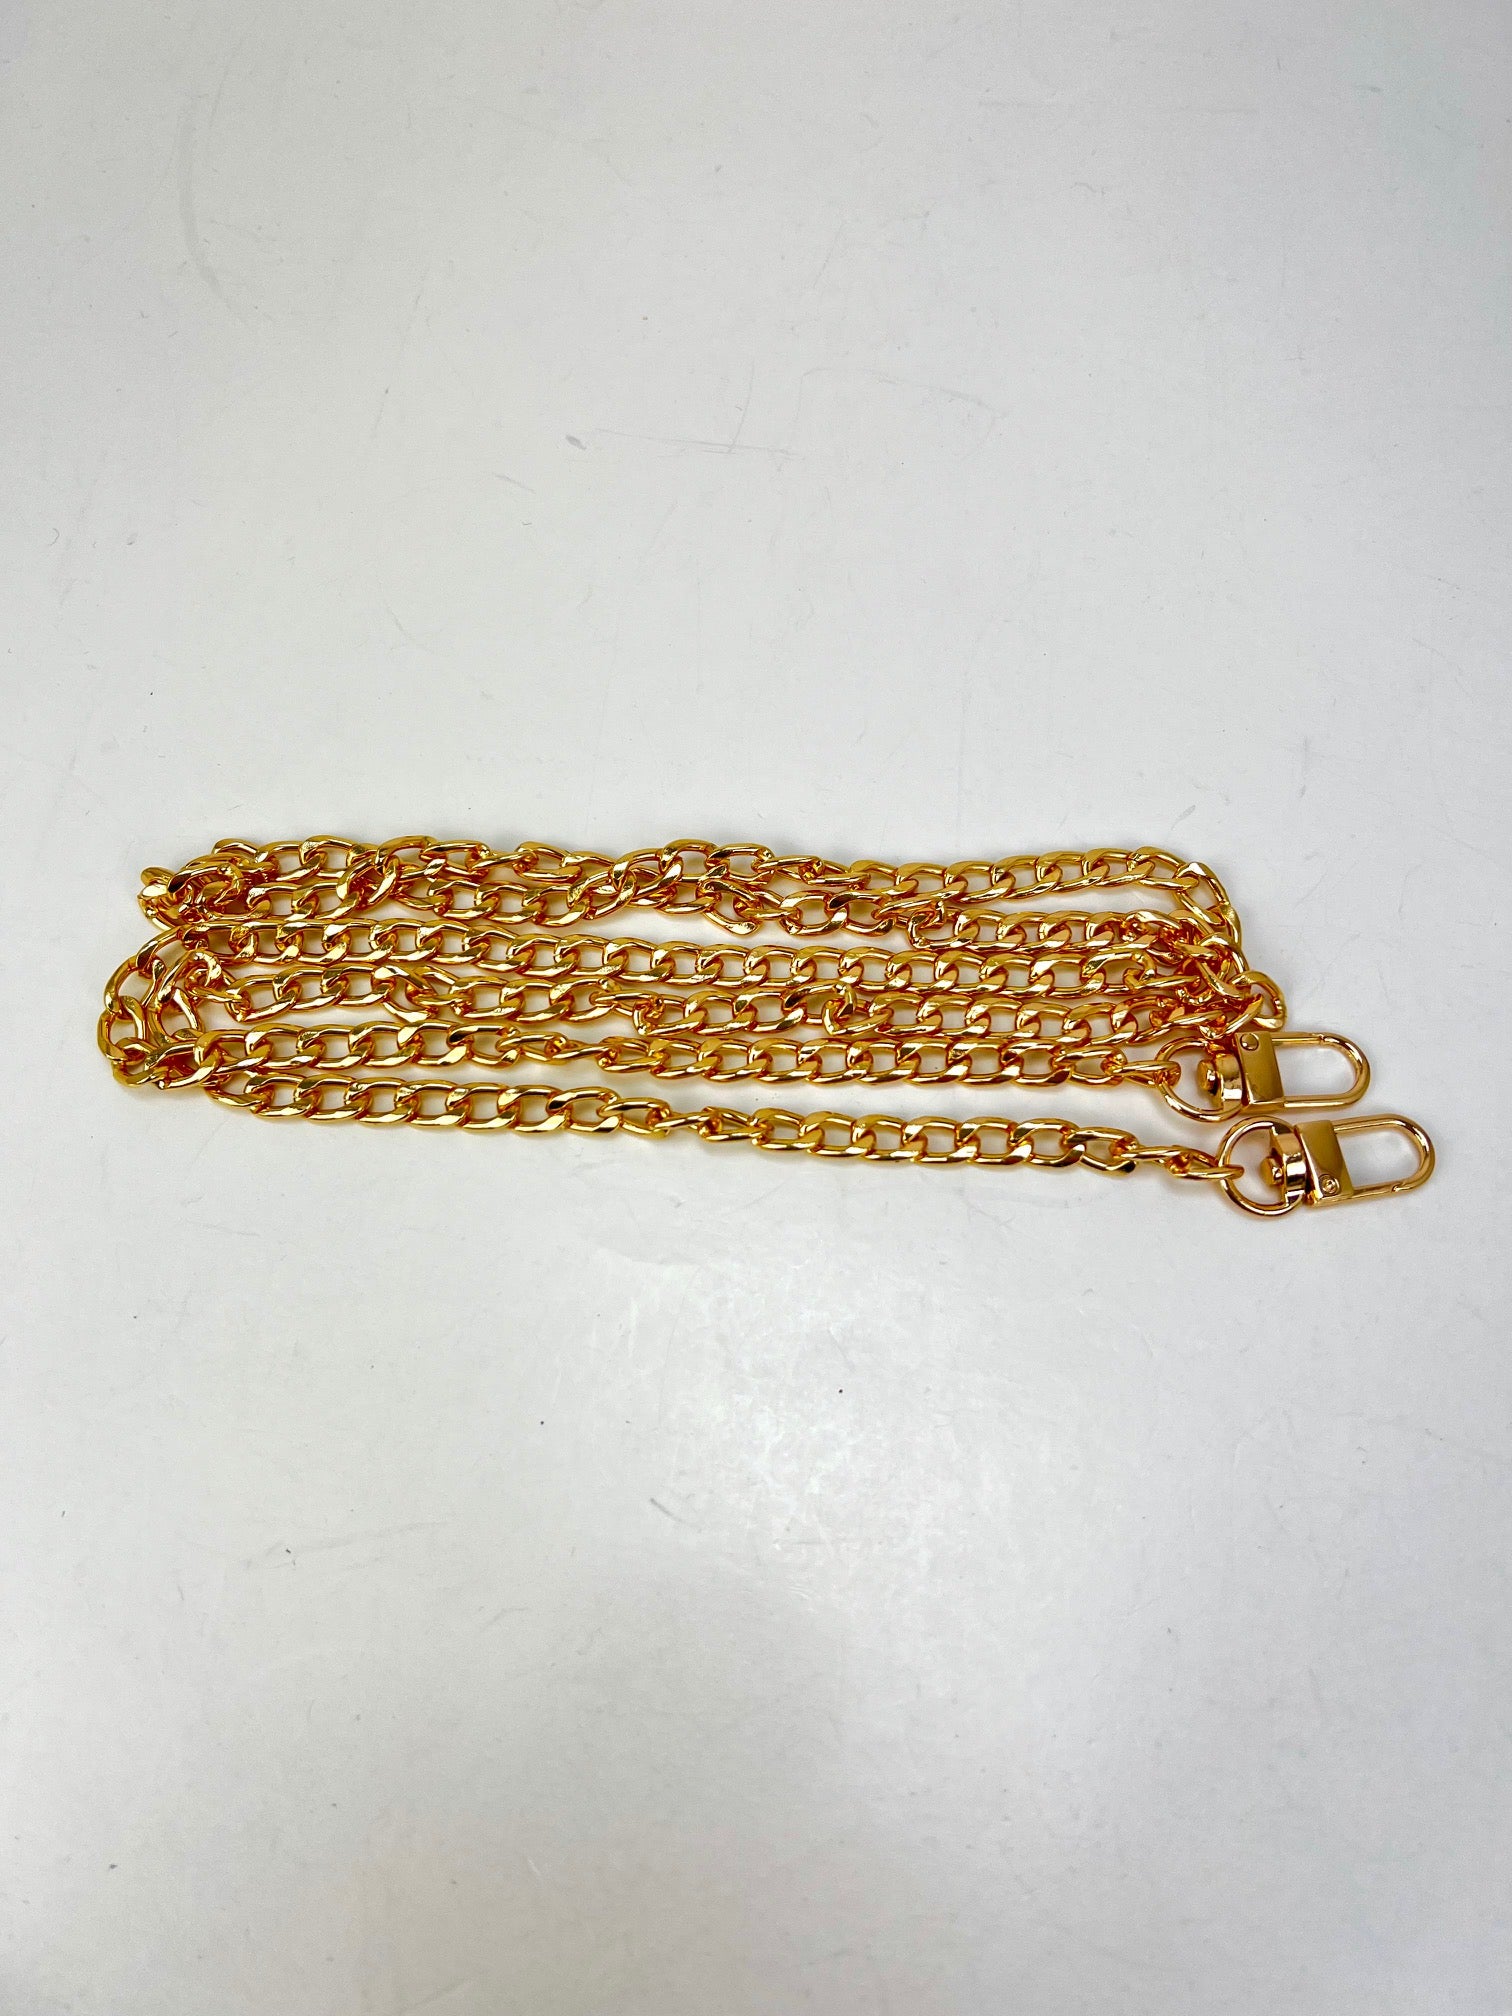 Replacement Golden Chain Strap for Hand Crossbody Bag New